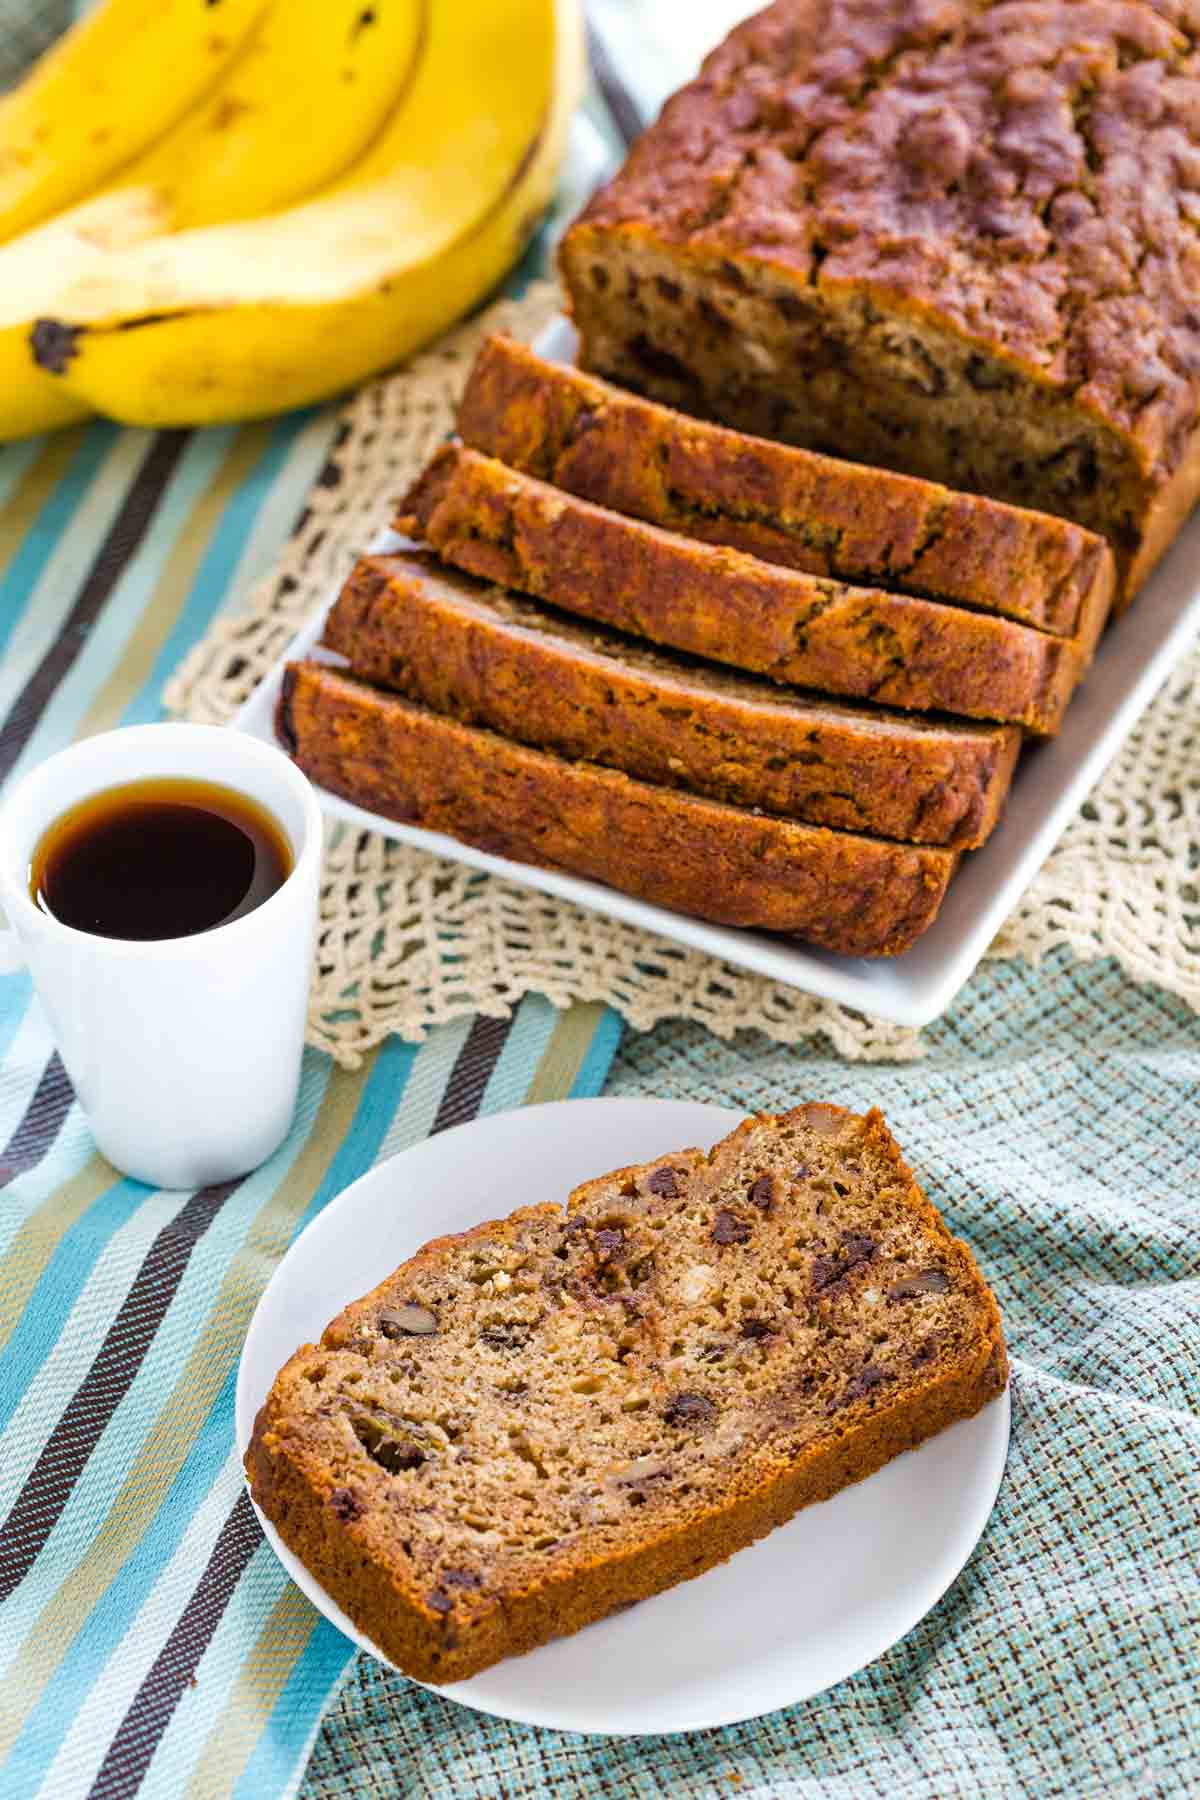 A sliced loaf of gluten free banana nut bread on a white rectangular plate on top of cloth napkins and placemats.